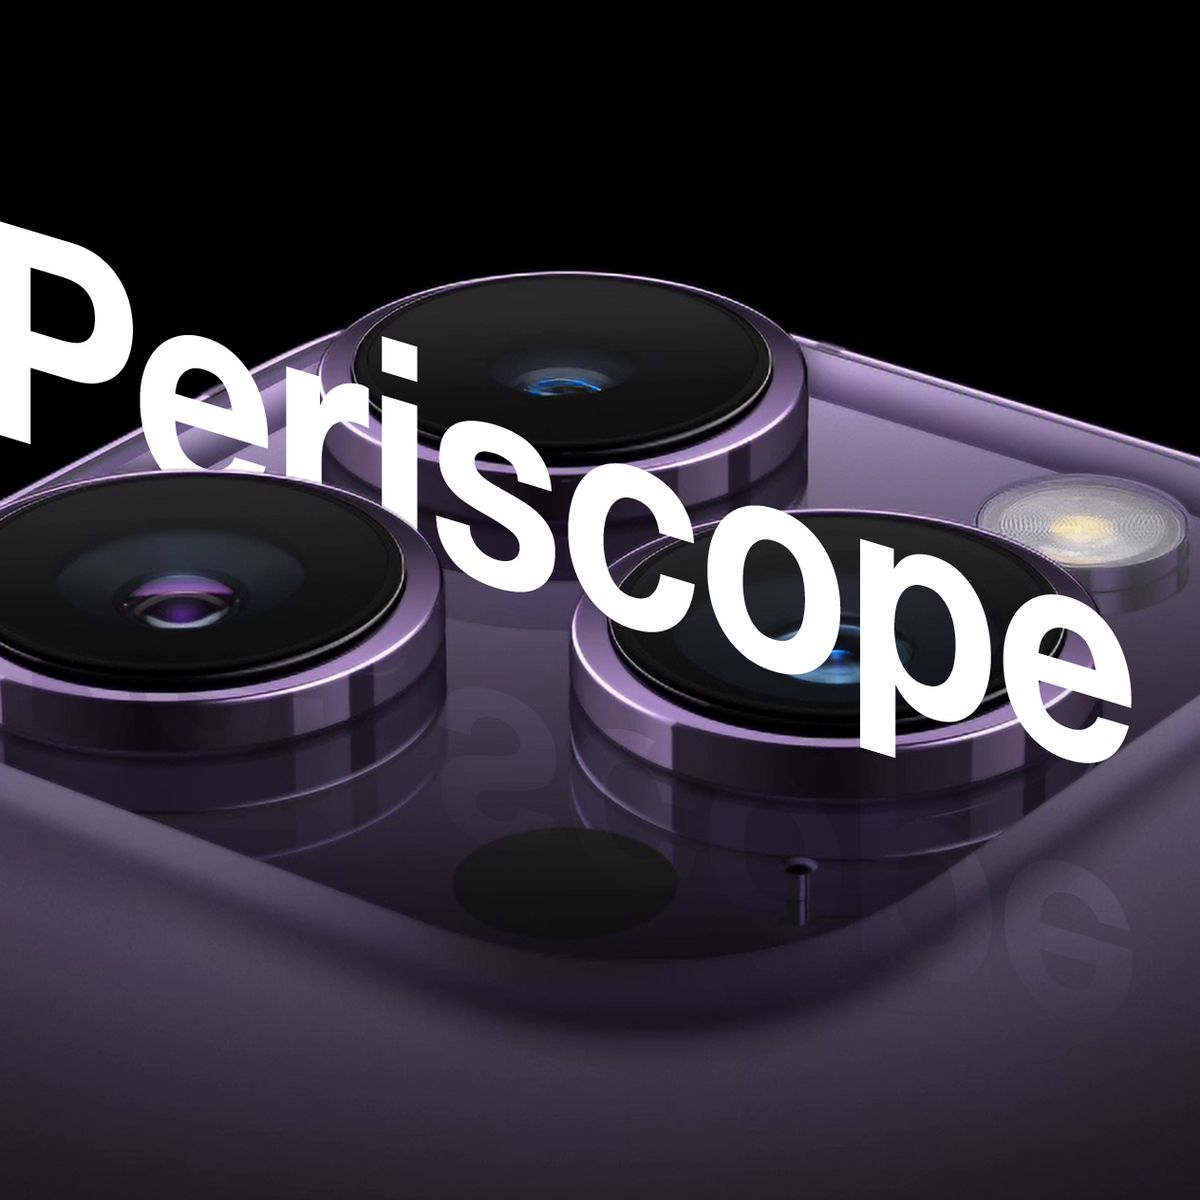 Apple Likely to Add Second Periscope Supplier Pro Max - MacRumors